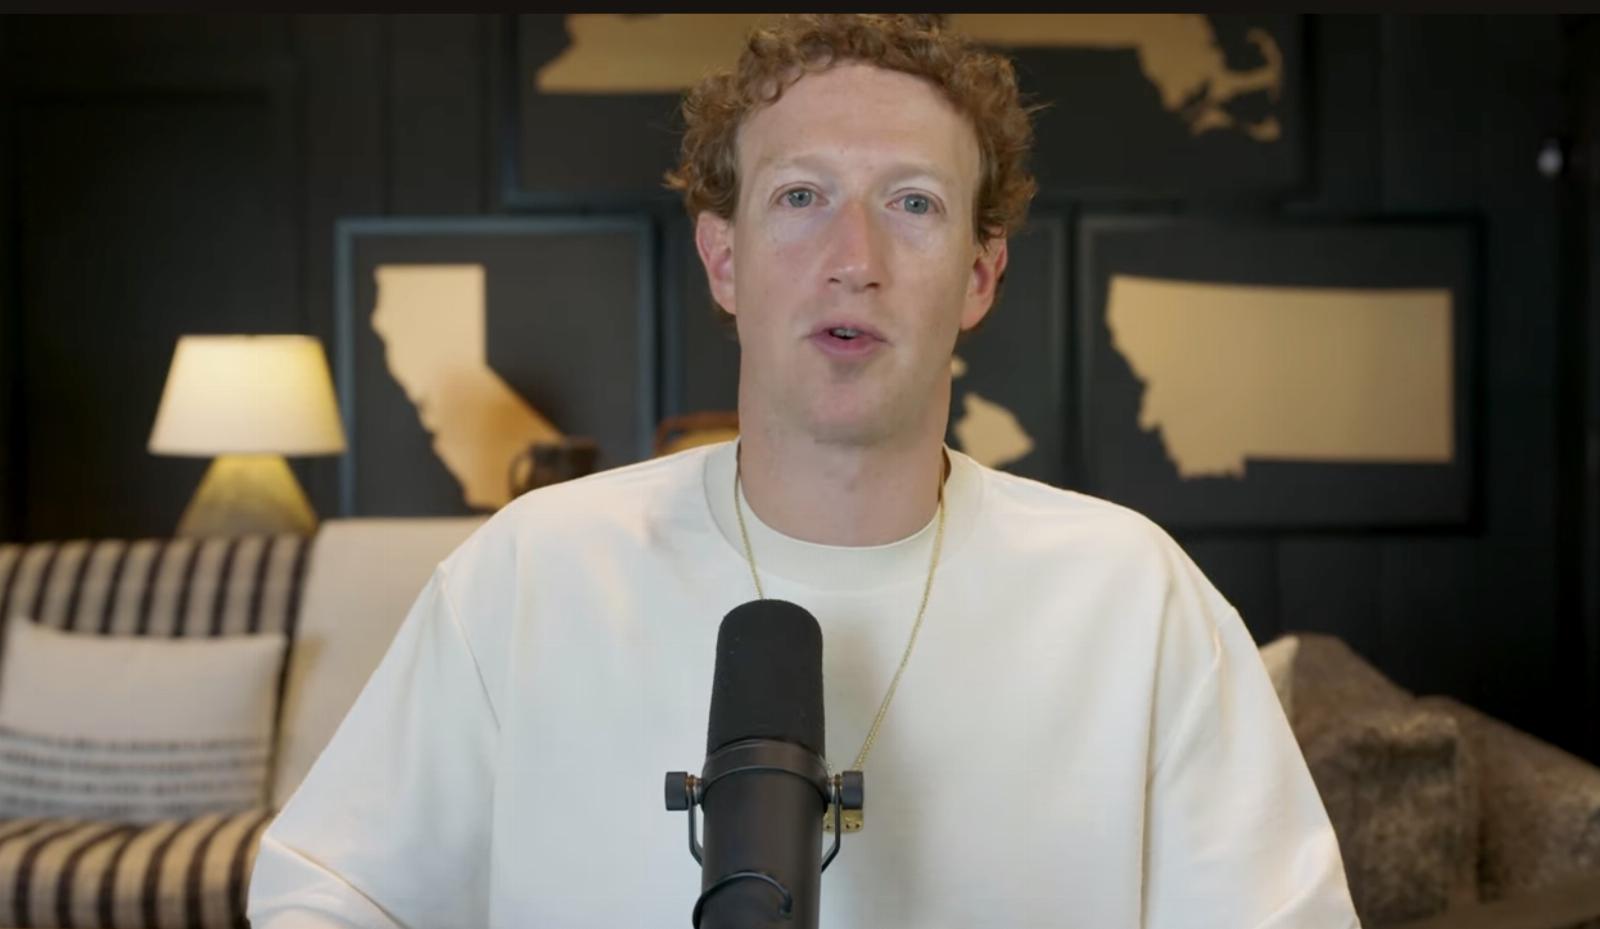 Zuckerberg disses closed source AI competitors as trying to ‘create God’